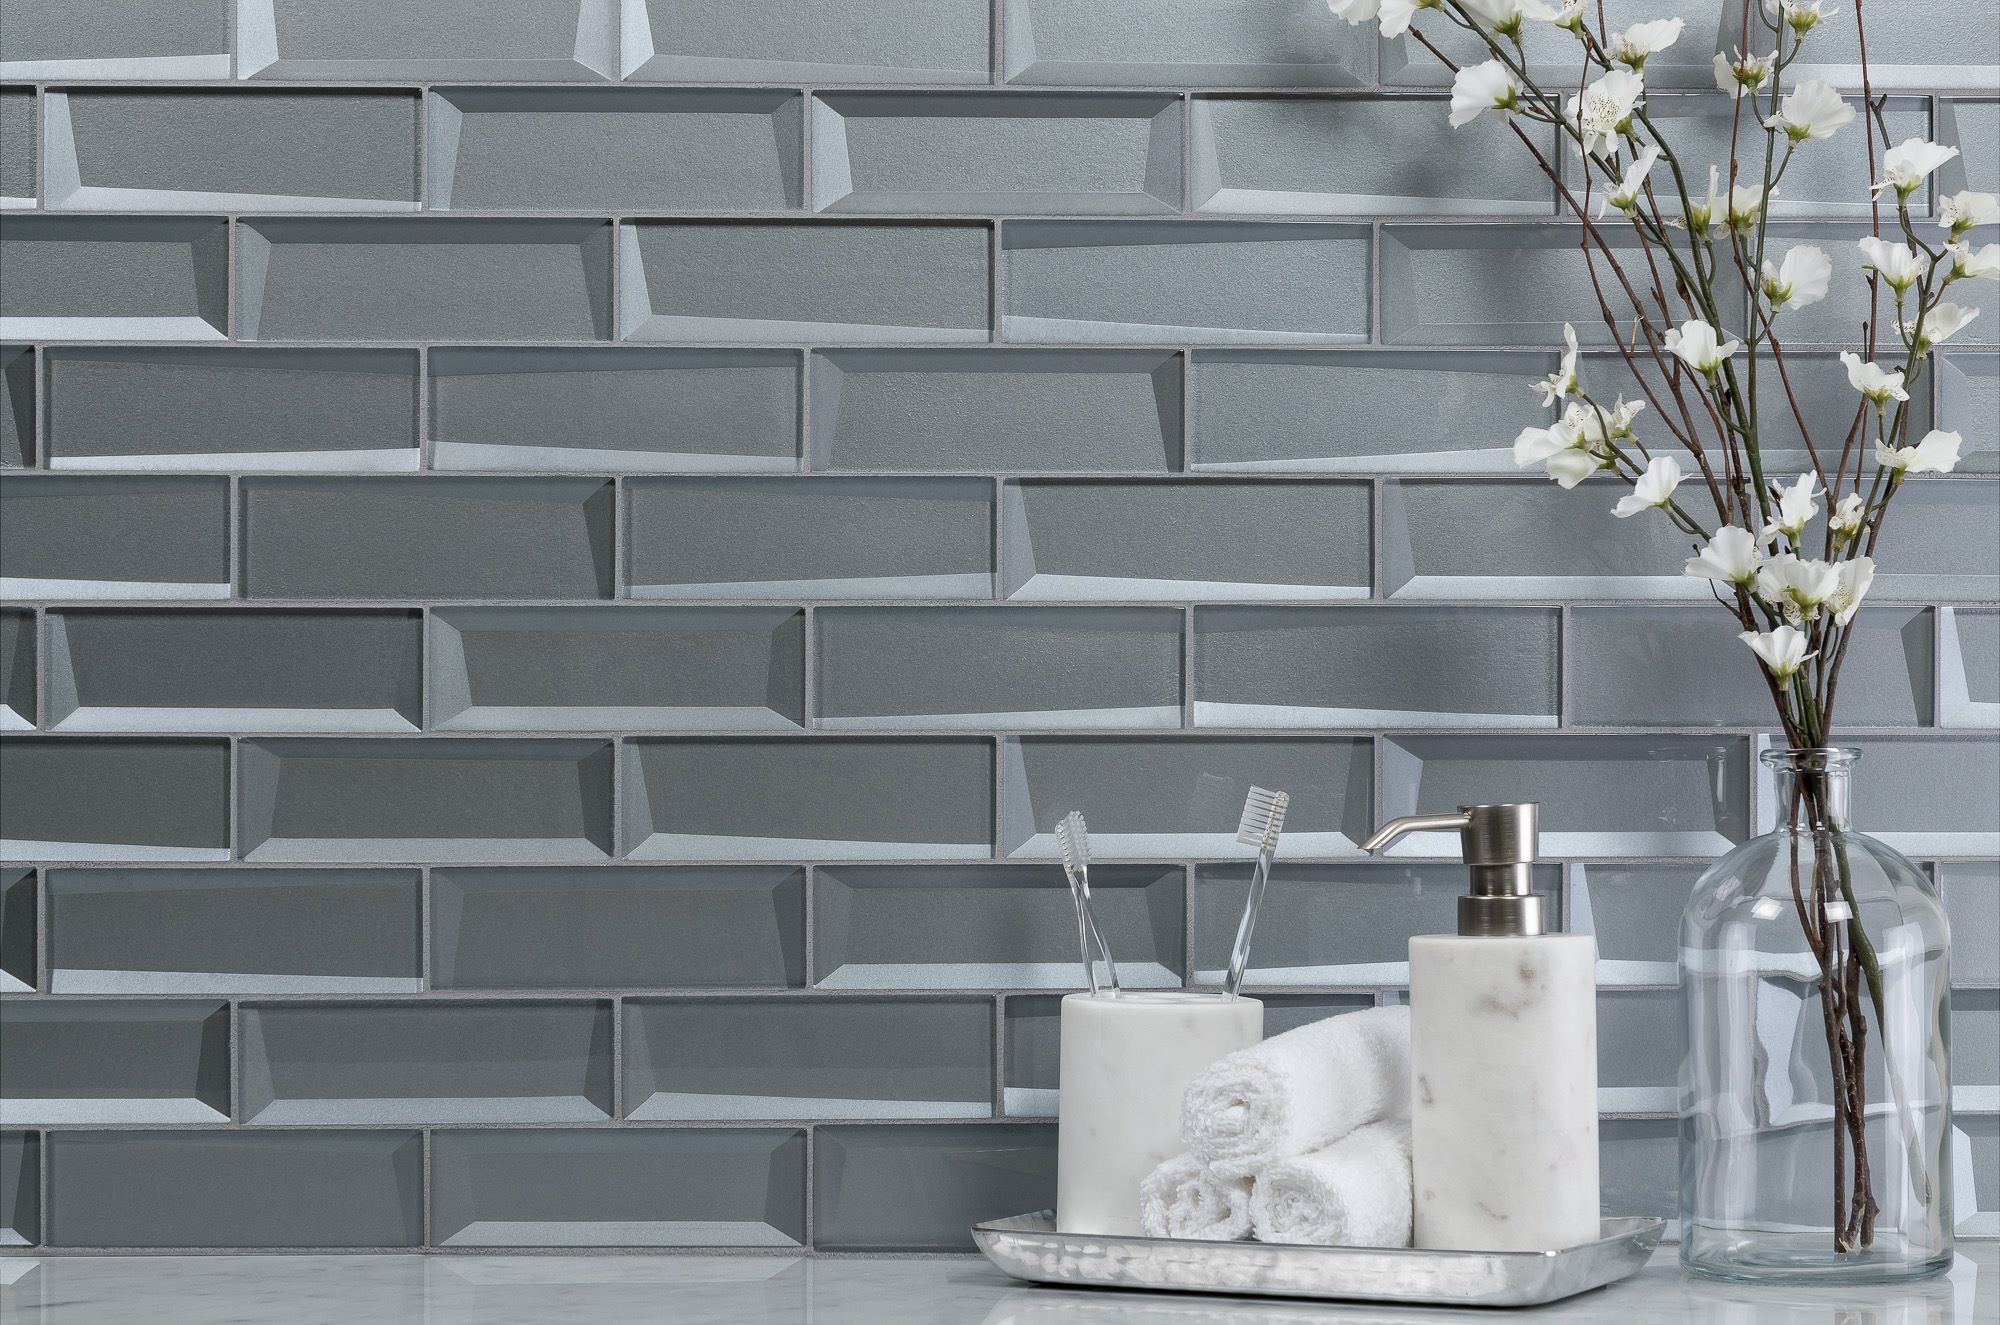 WA169 | Stones & More | Finest selection of Mosaics, Glass, Tile and Stone